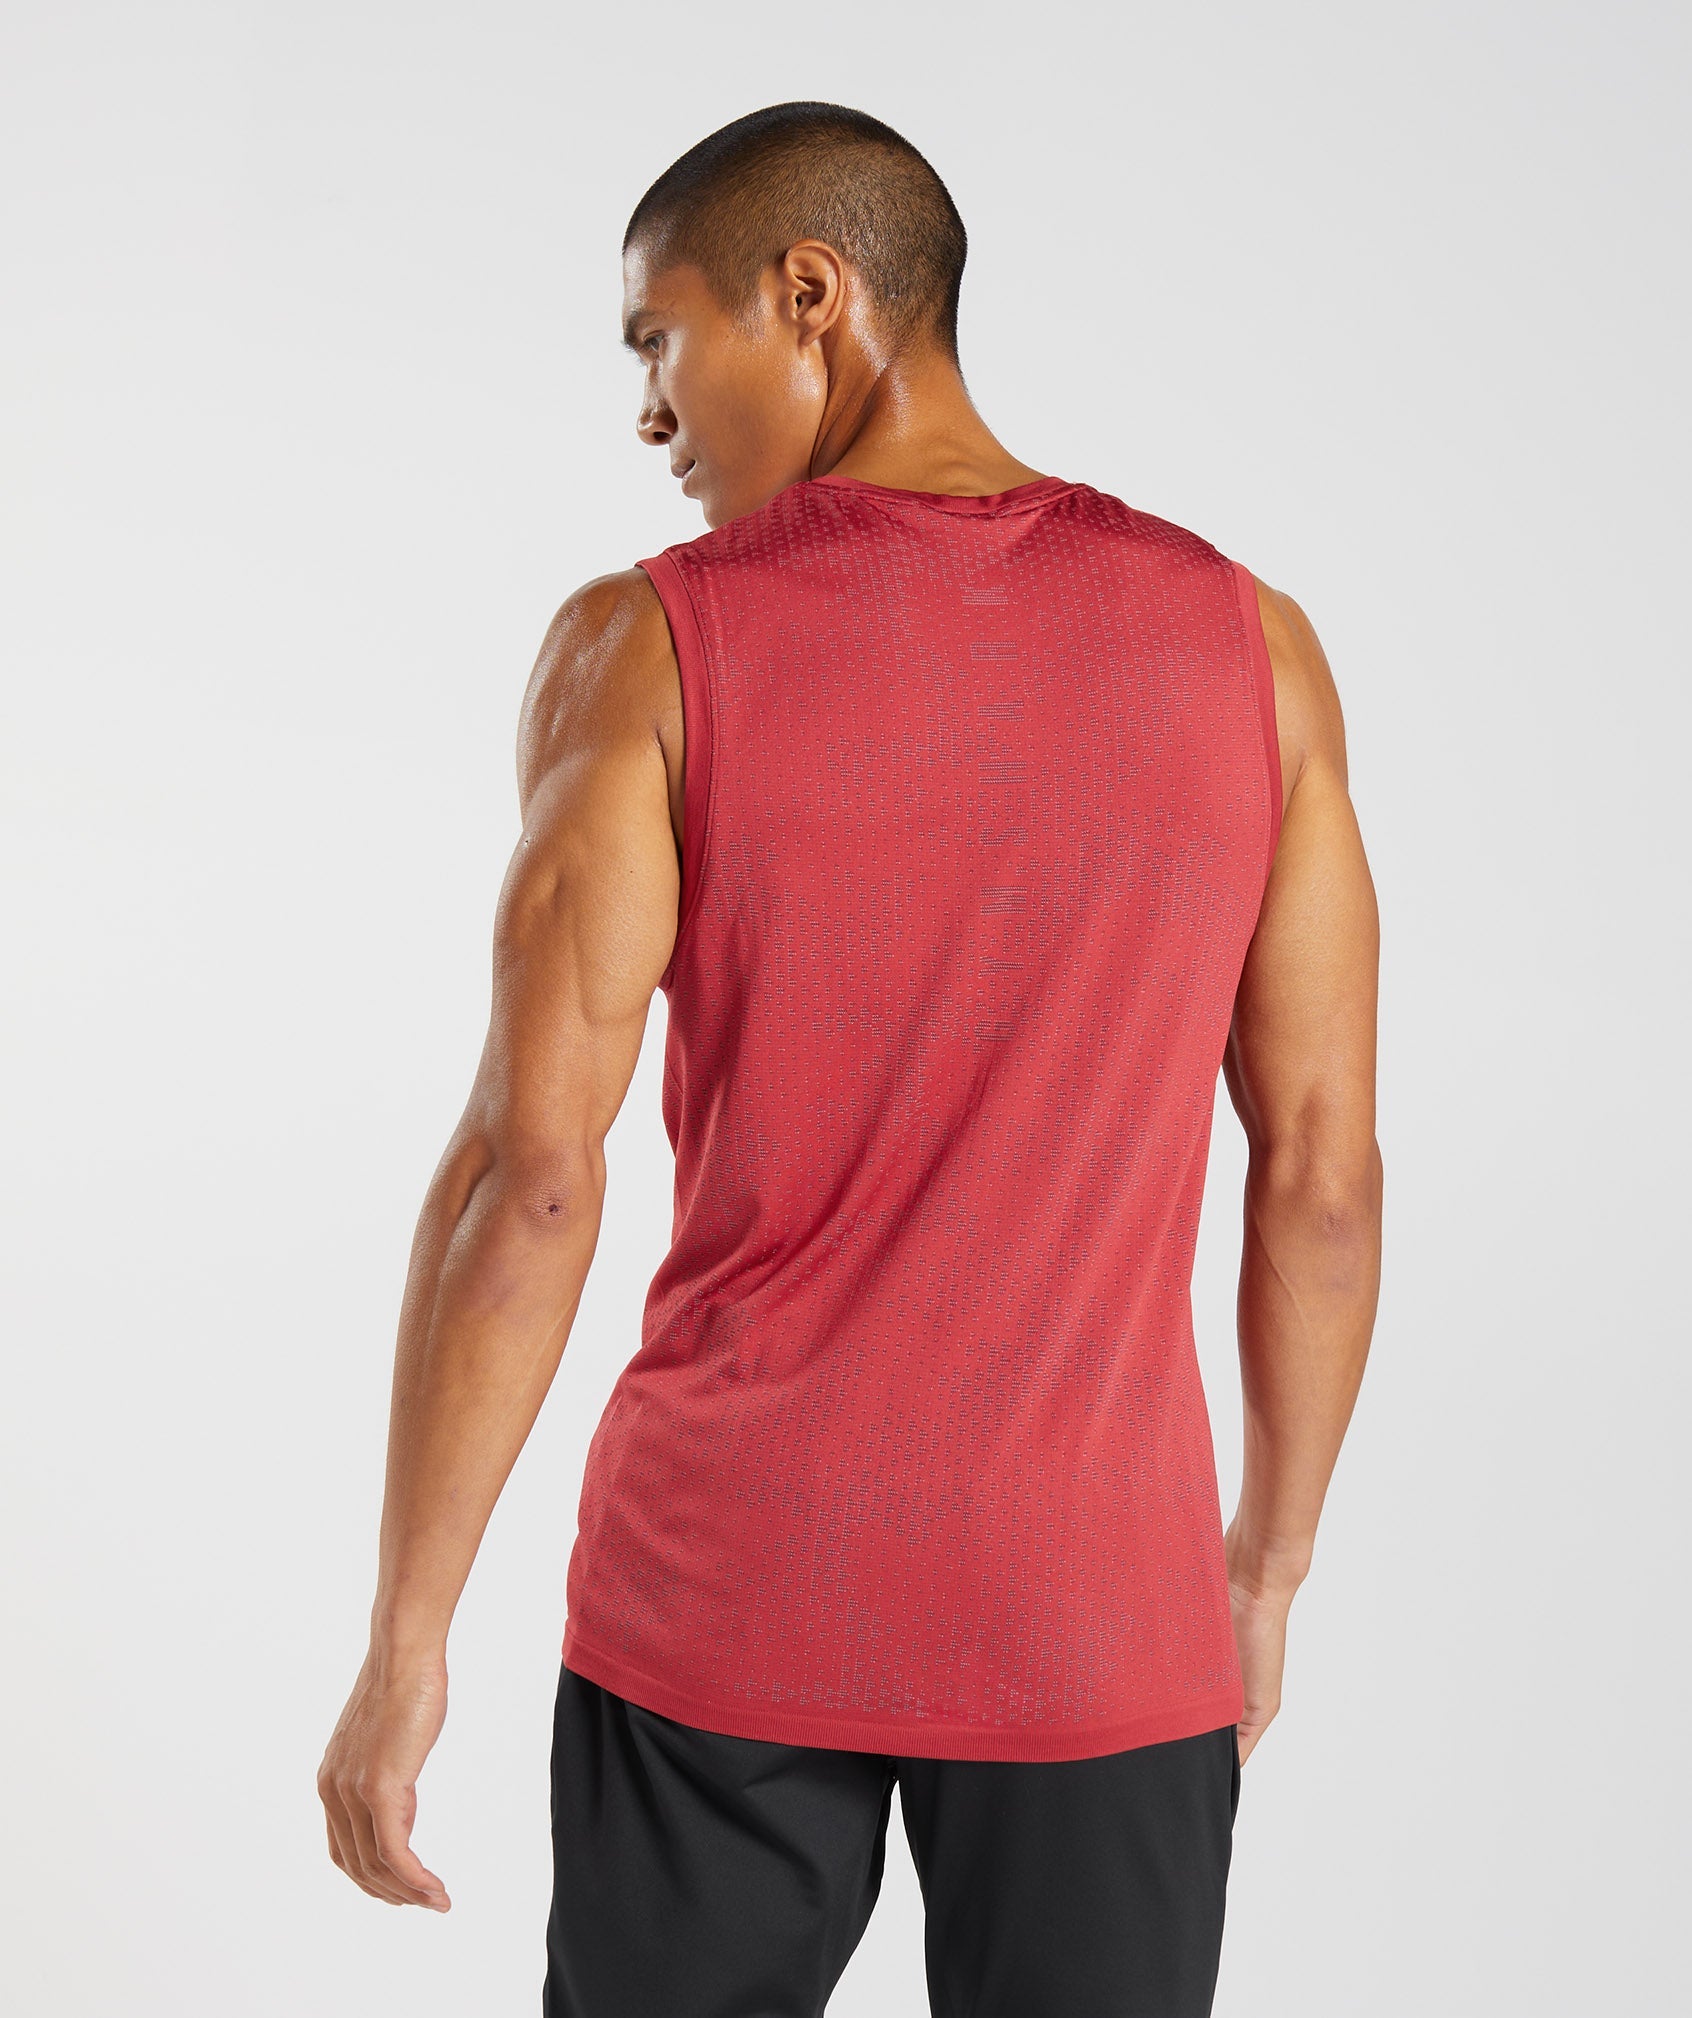 Sport Seamless Tank in Salsa Red/Baked Maroon - view 2